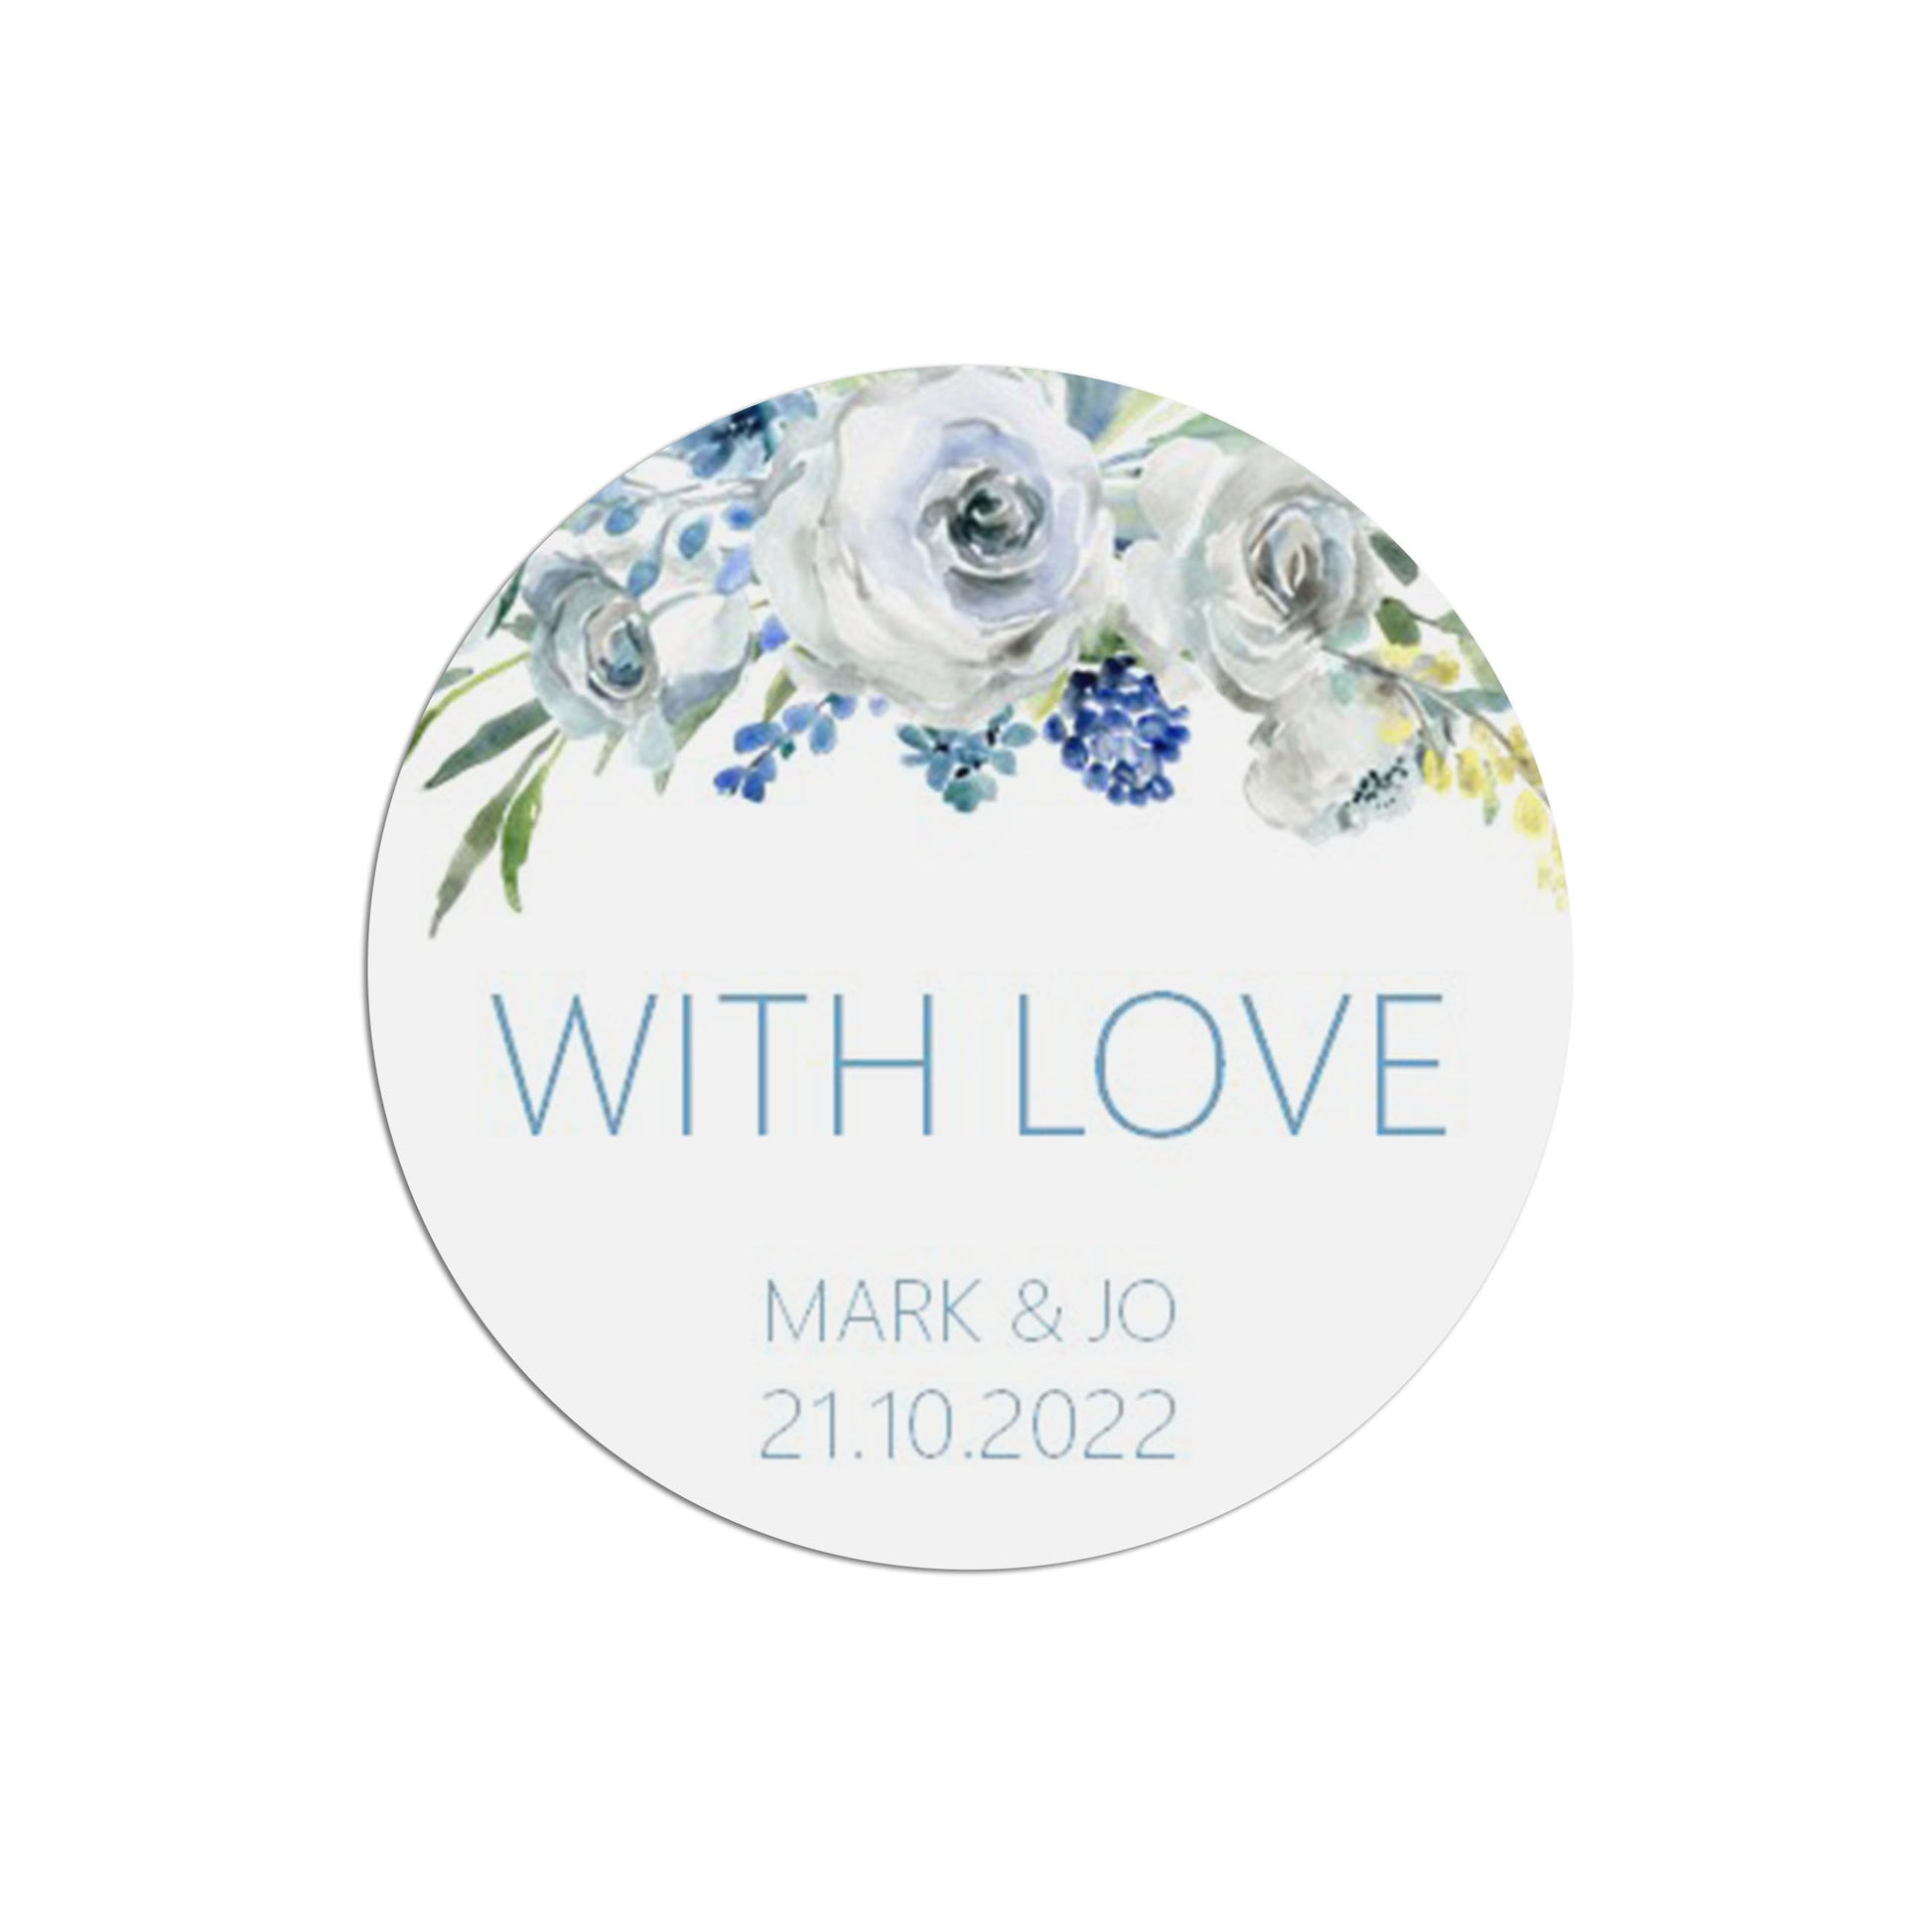 With Love Wedding Stickers, Blue Floral Effect 37mm Round Personalised x 35 Stickers Per Sheet